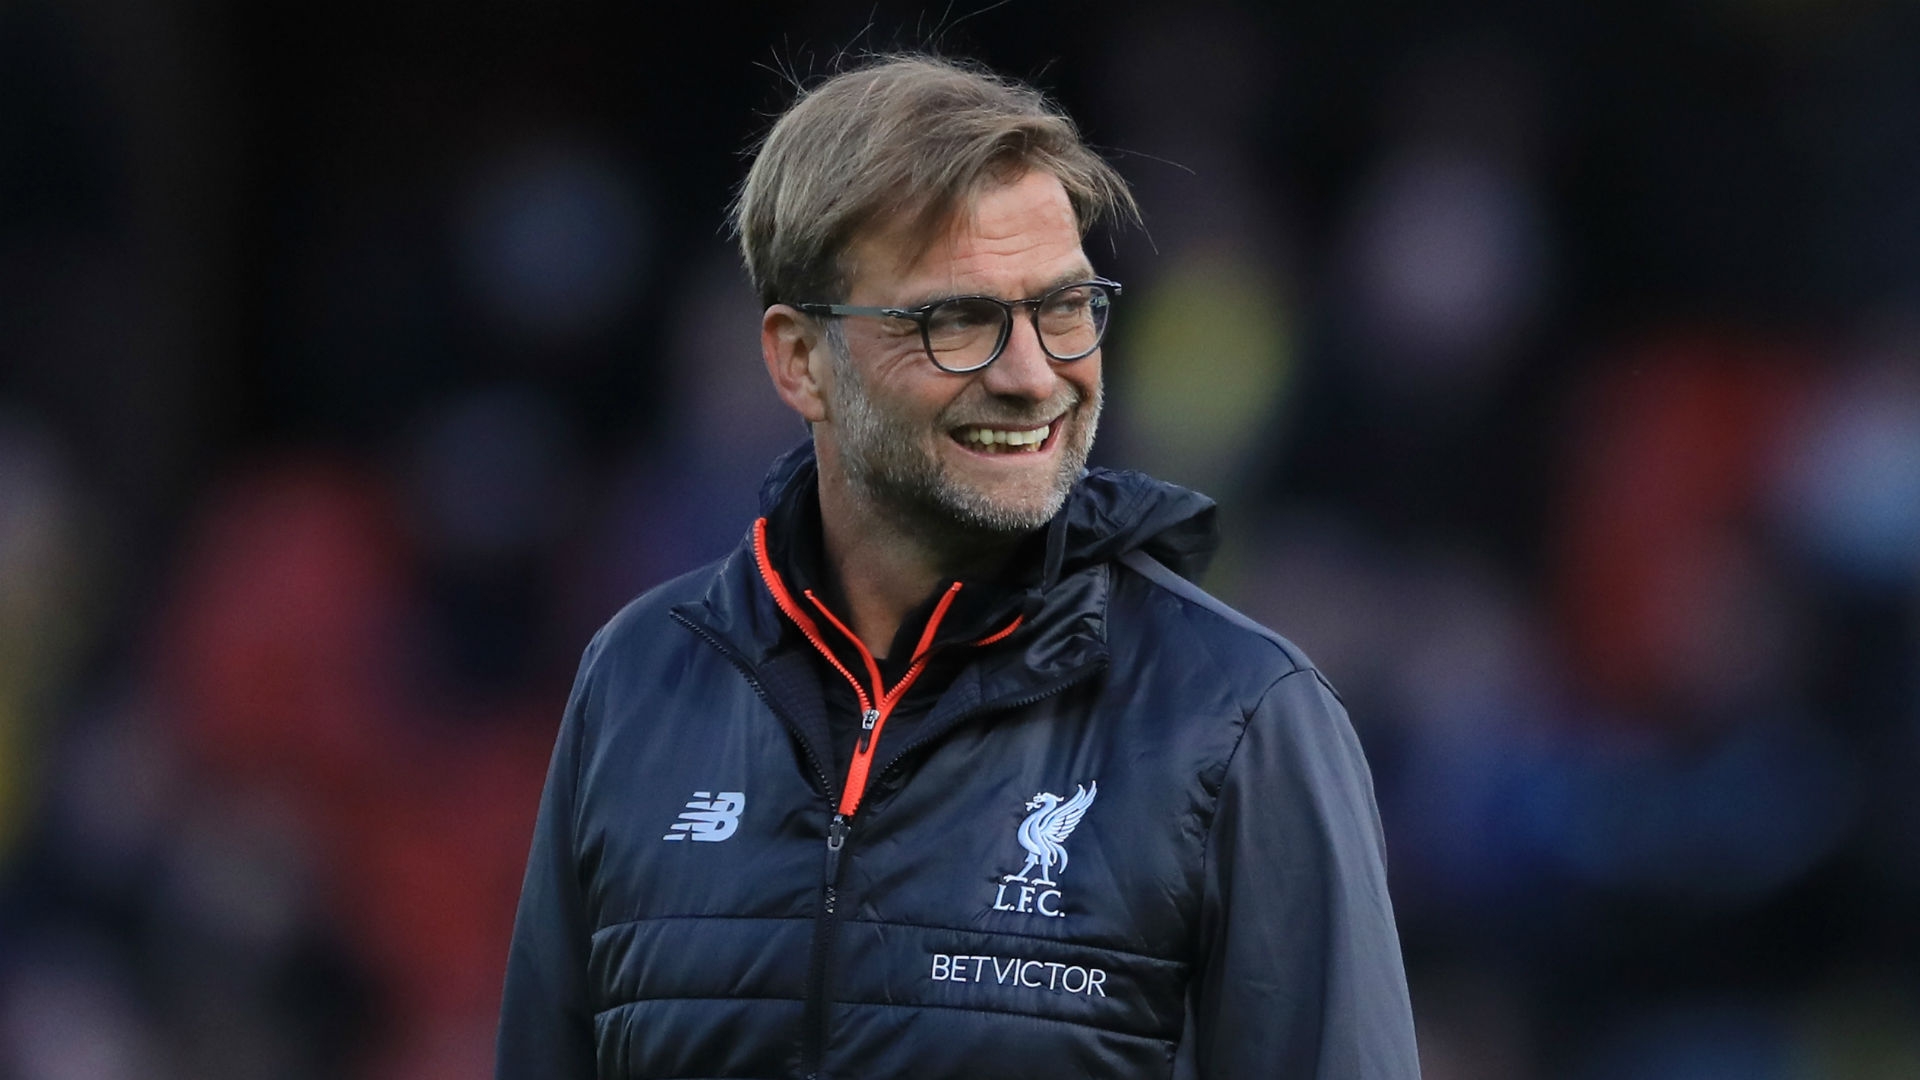 Jurgen Klopp knows transfer targets are holding discussions with other clubs